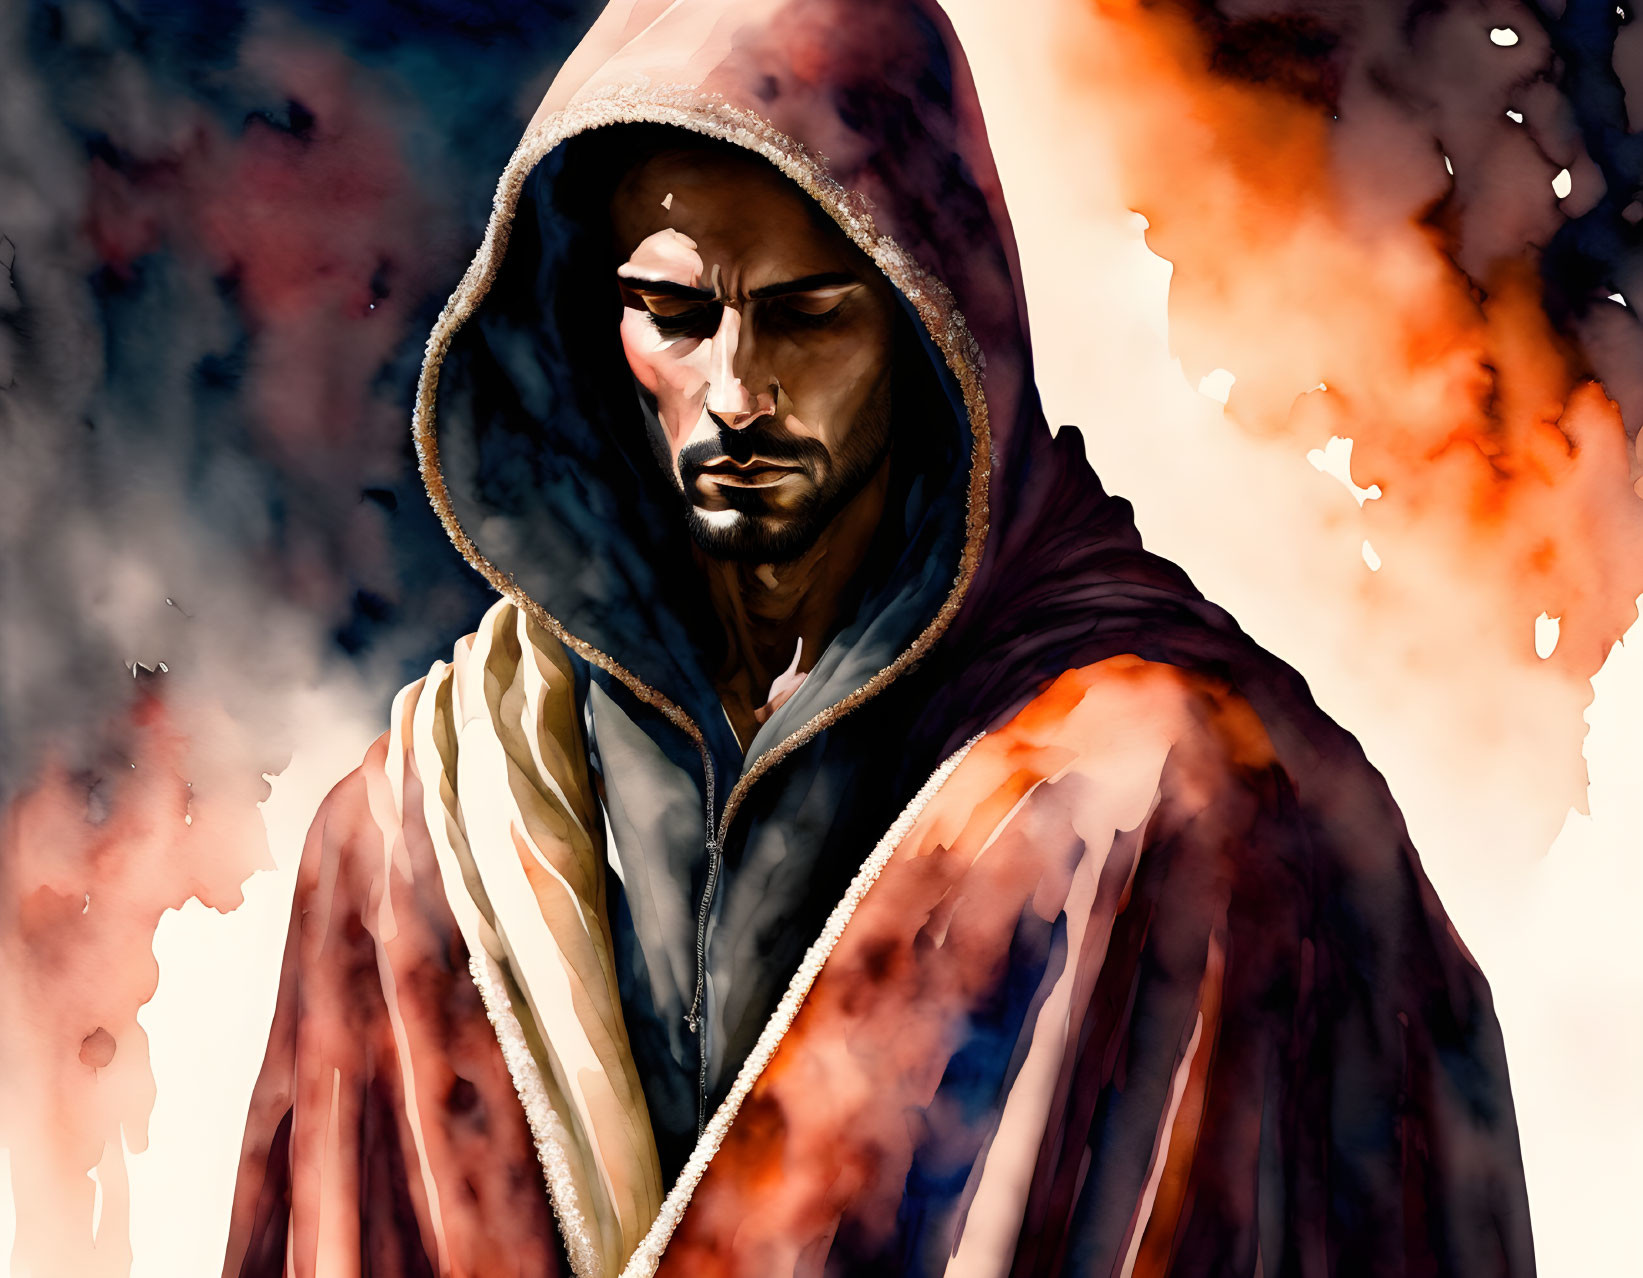 Colorful Watercolor Painting of a Hooded Man in Fiery Tones